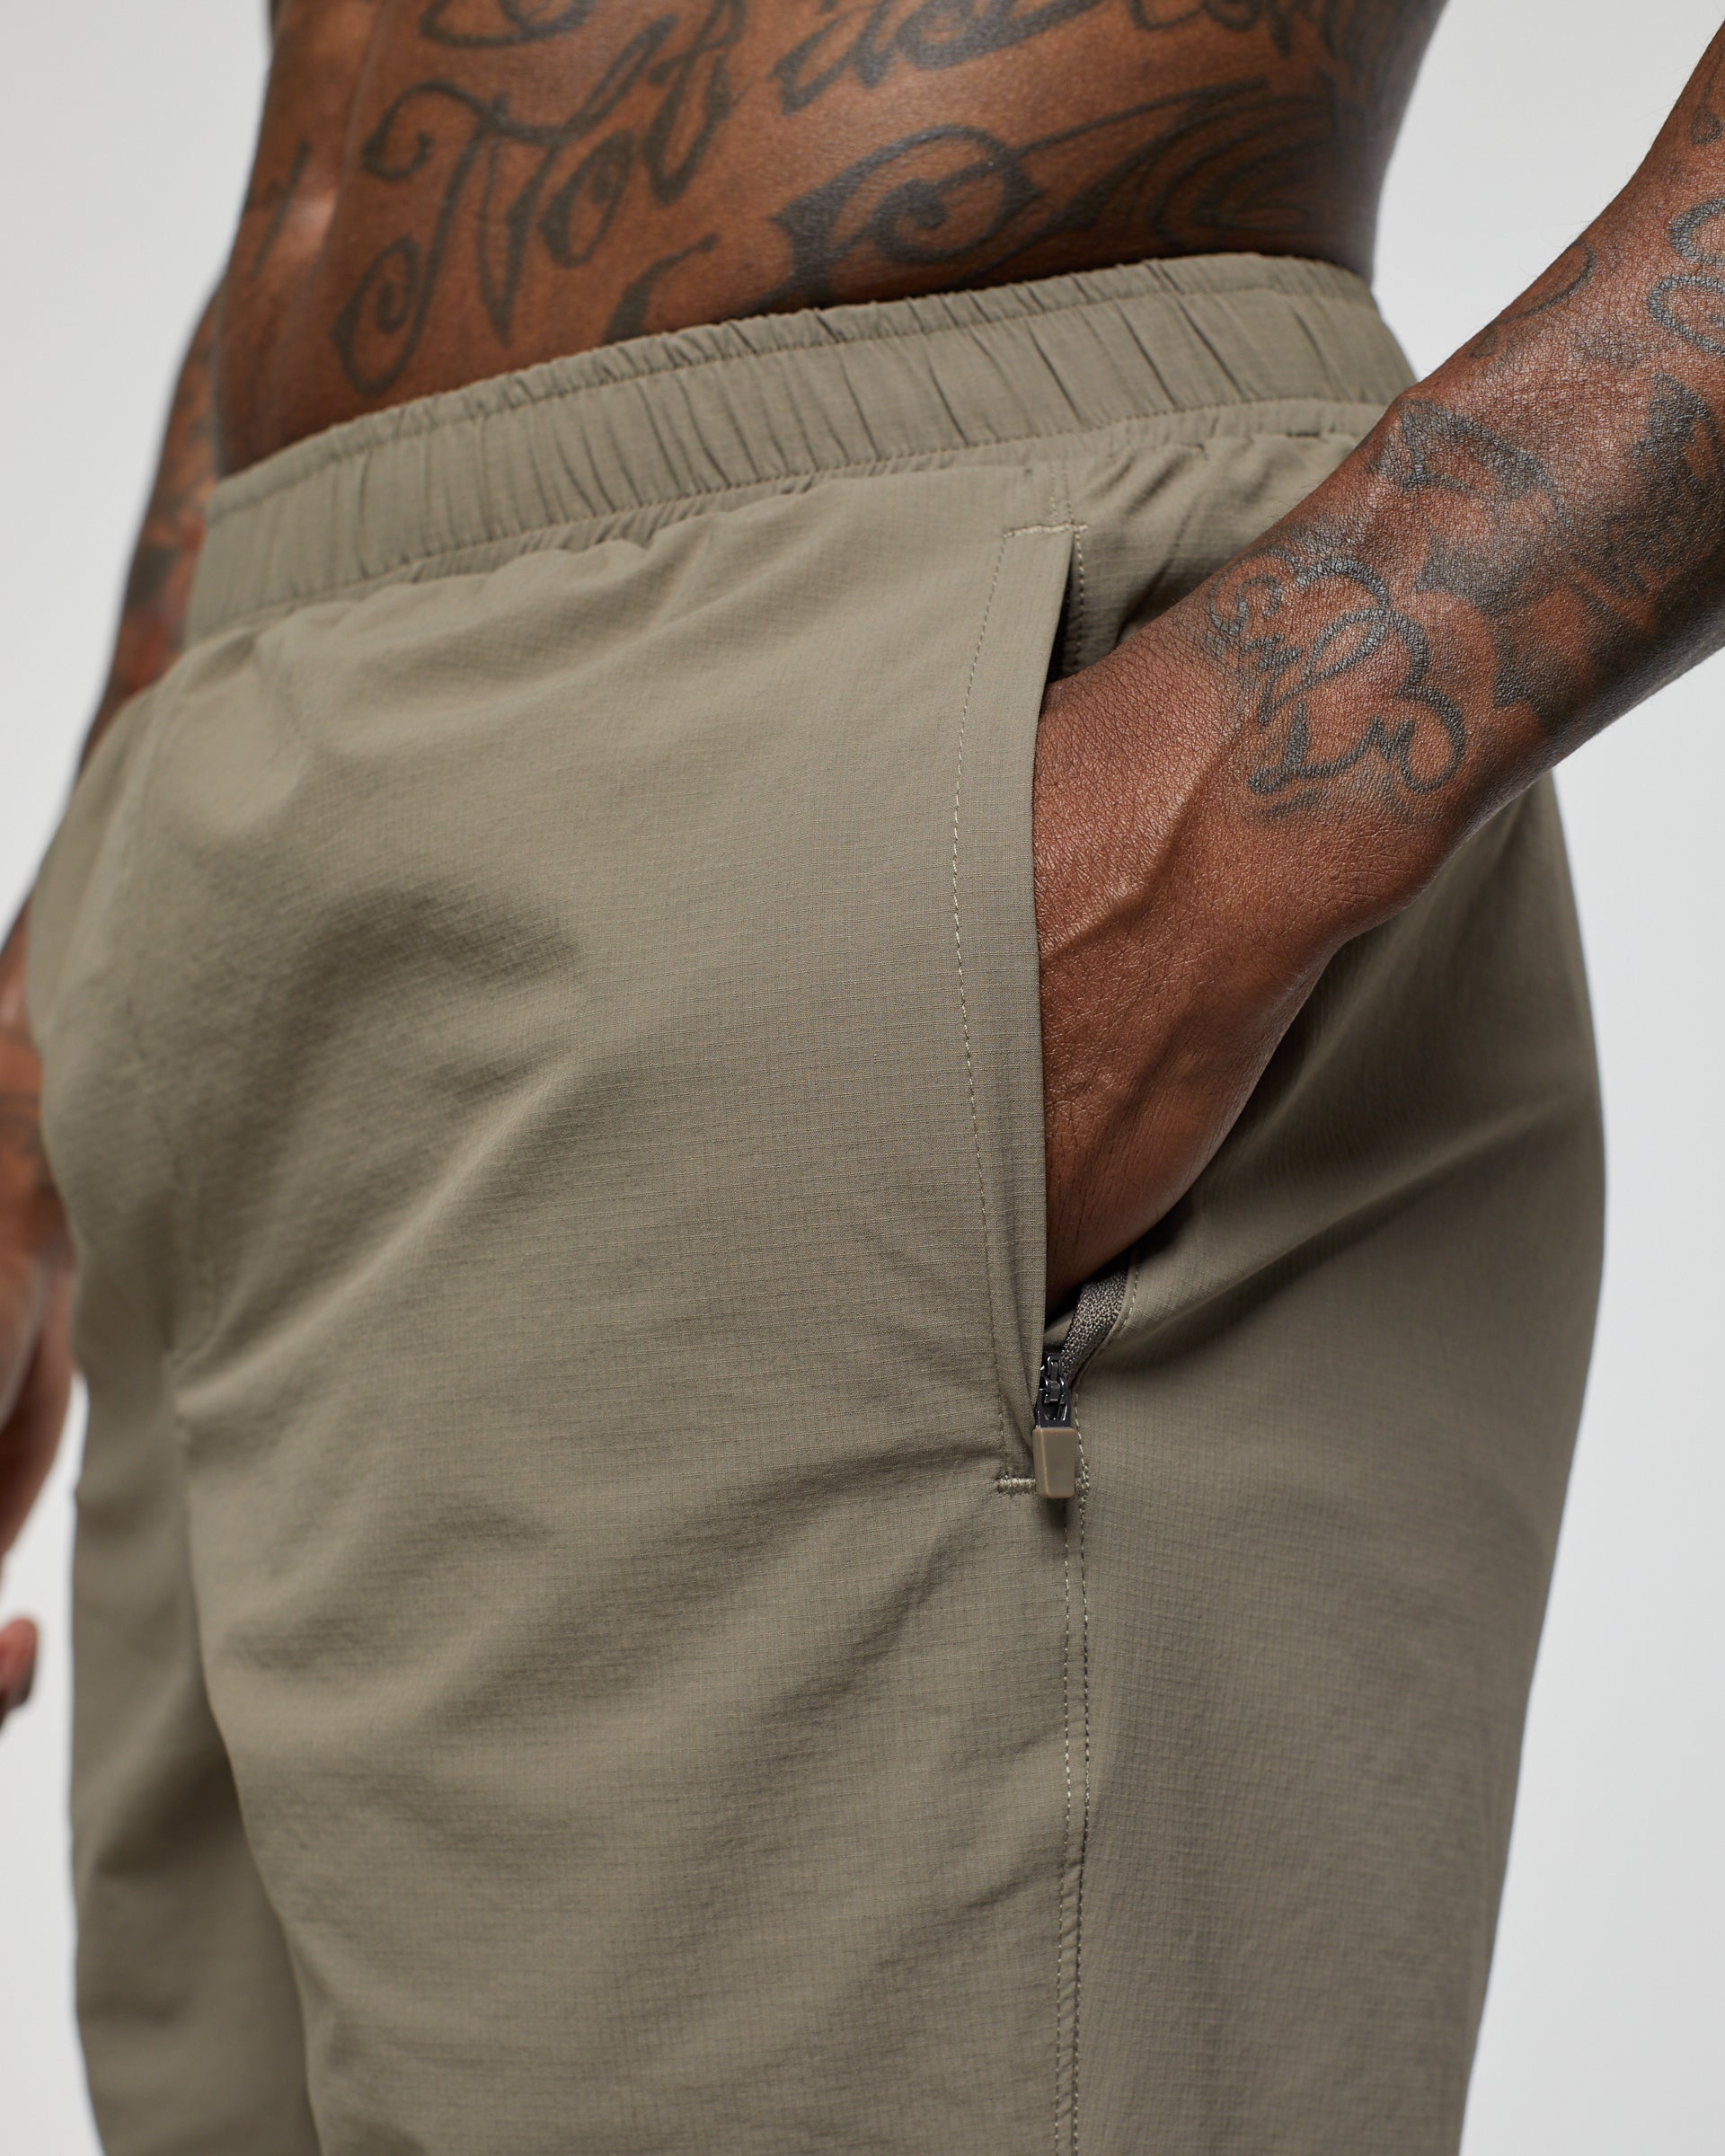 CORE SHORTS - TAUPE